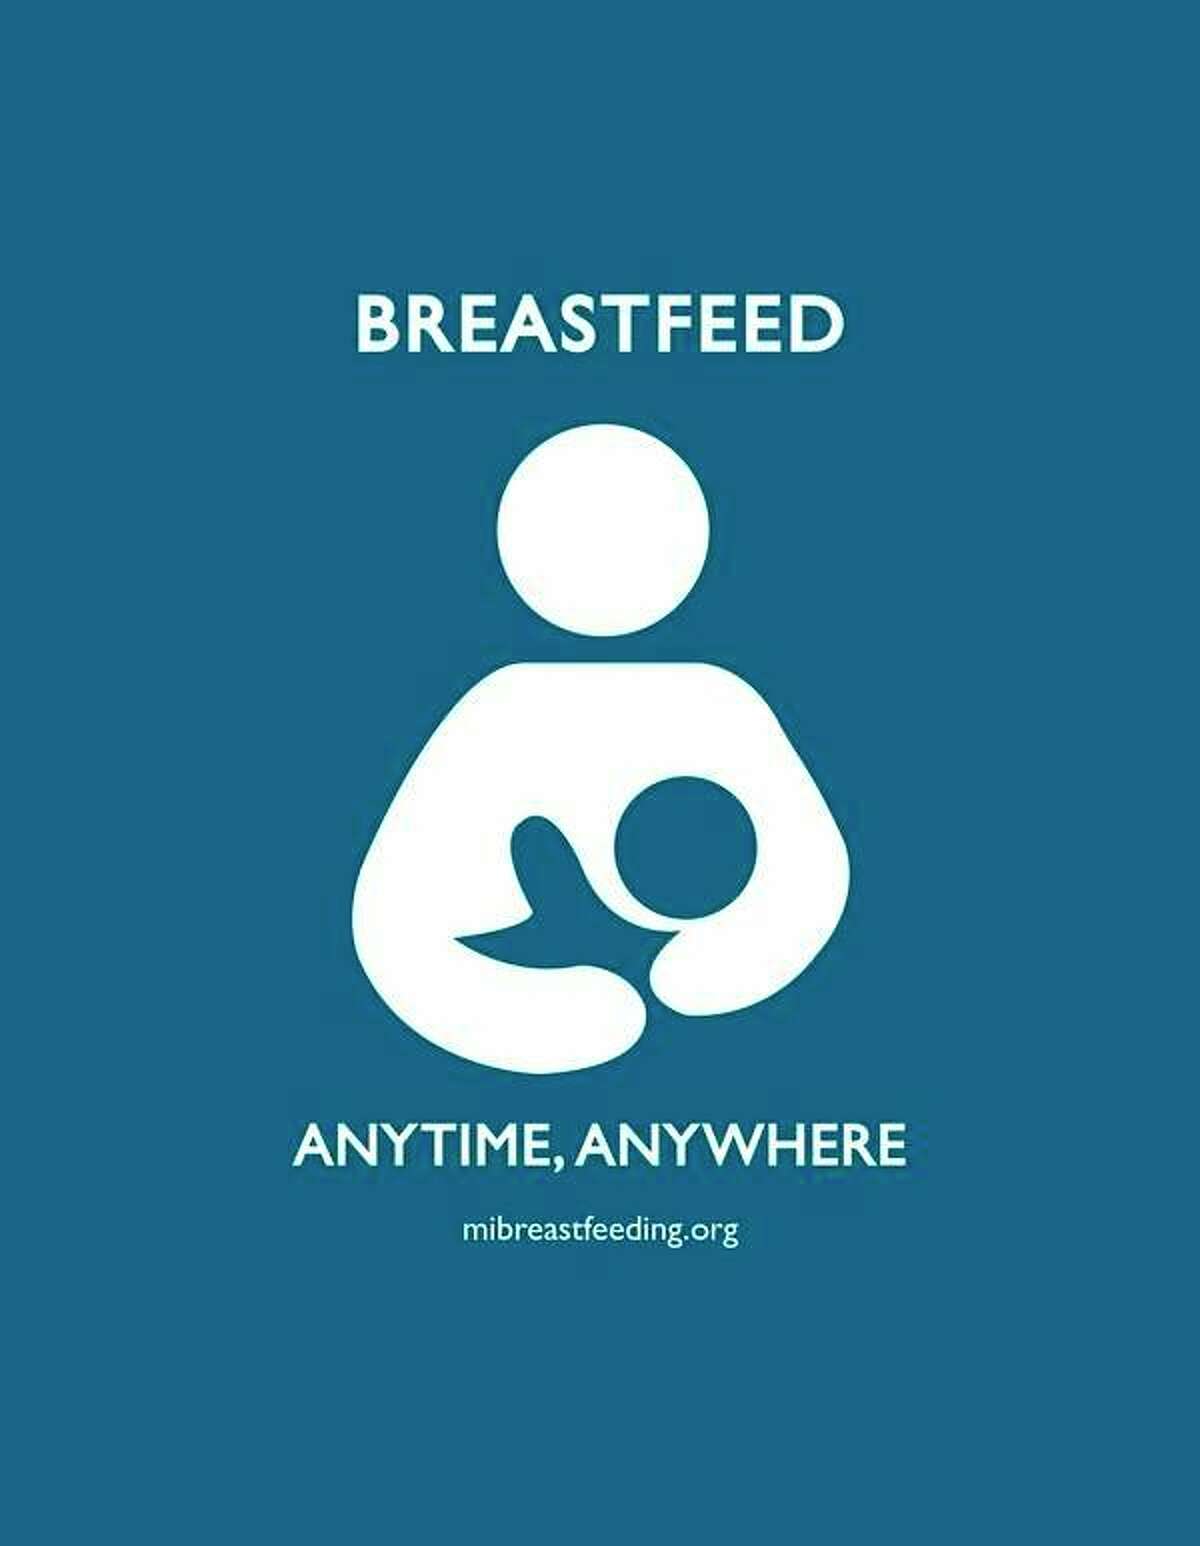 Featured is the "Anytime, Anywhere" sign businesses would post in their front window, if they decide to become part of the Michigan Initiative to normalize breastfeeding. (Courtesy photo)